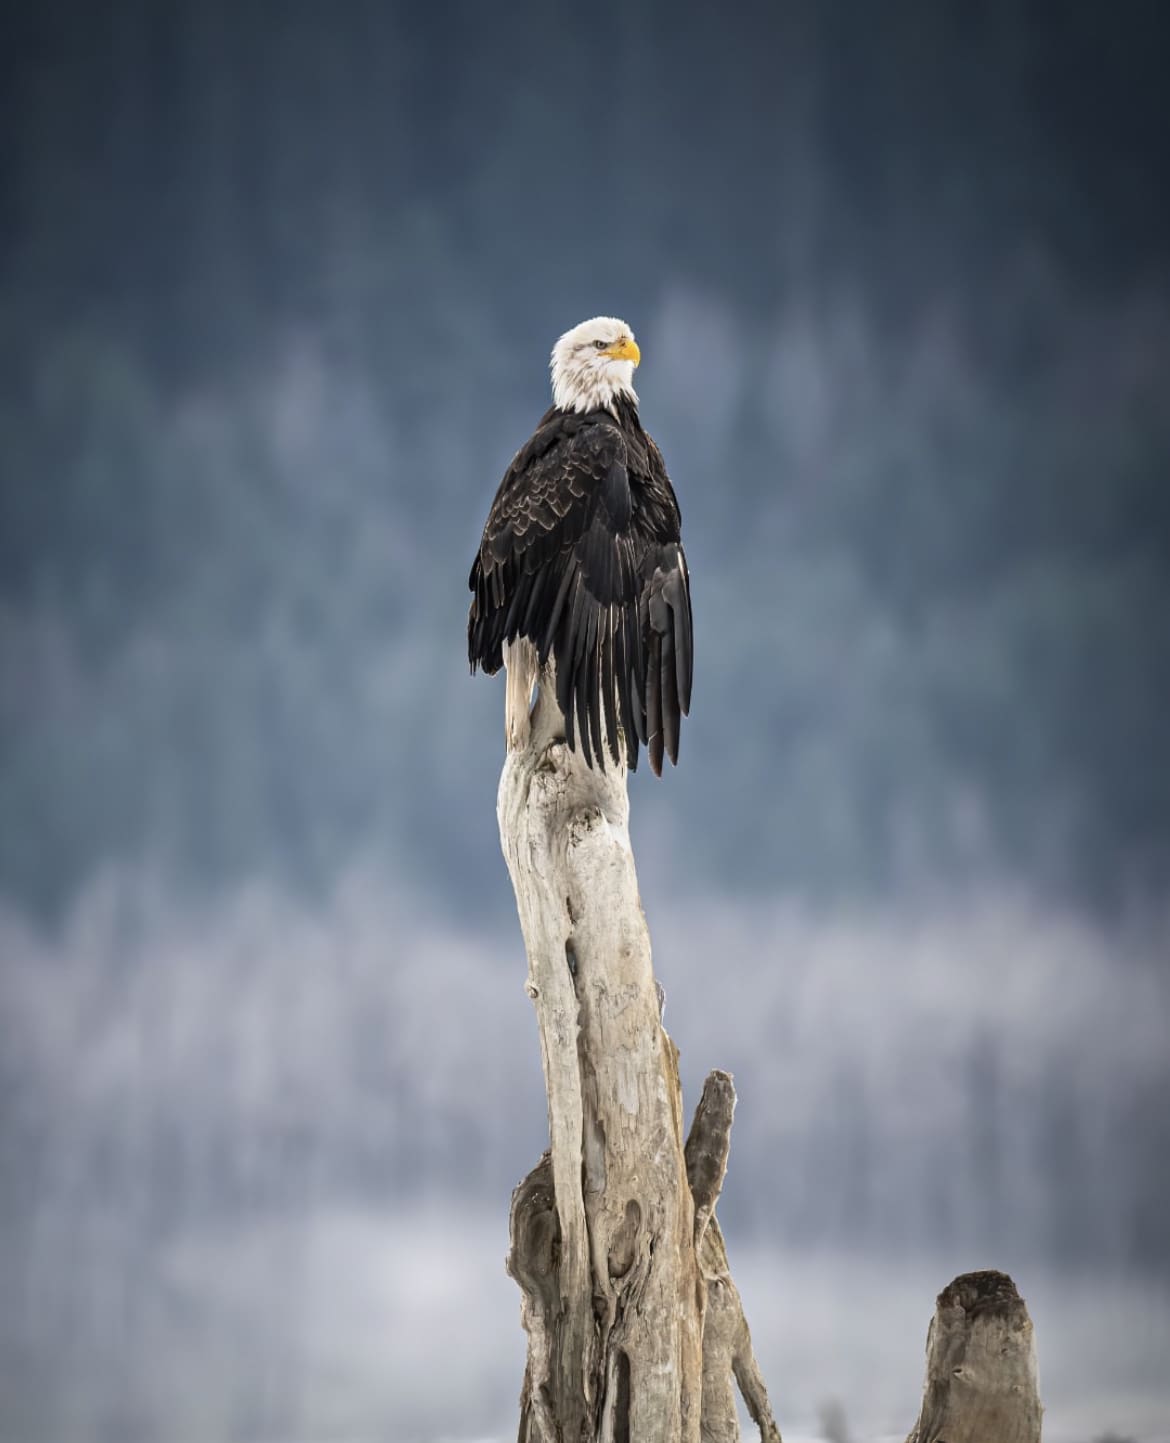 A bald eagle rests on a dead tree branch